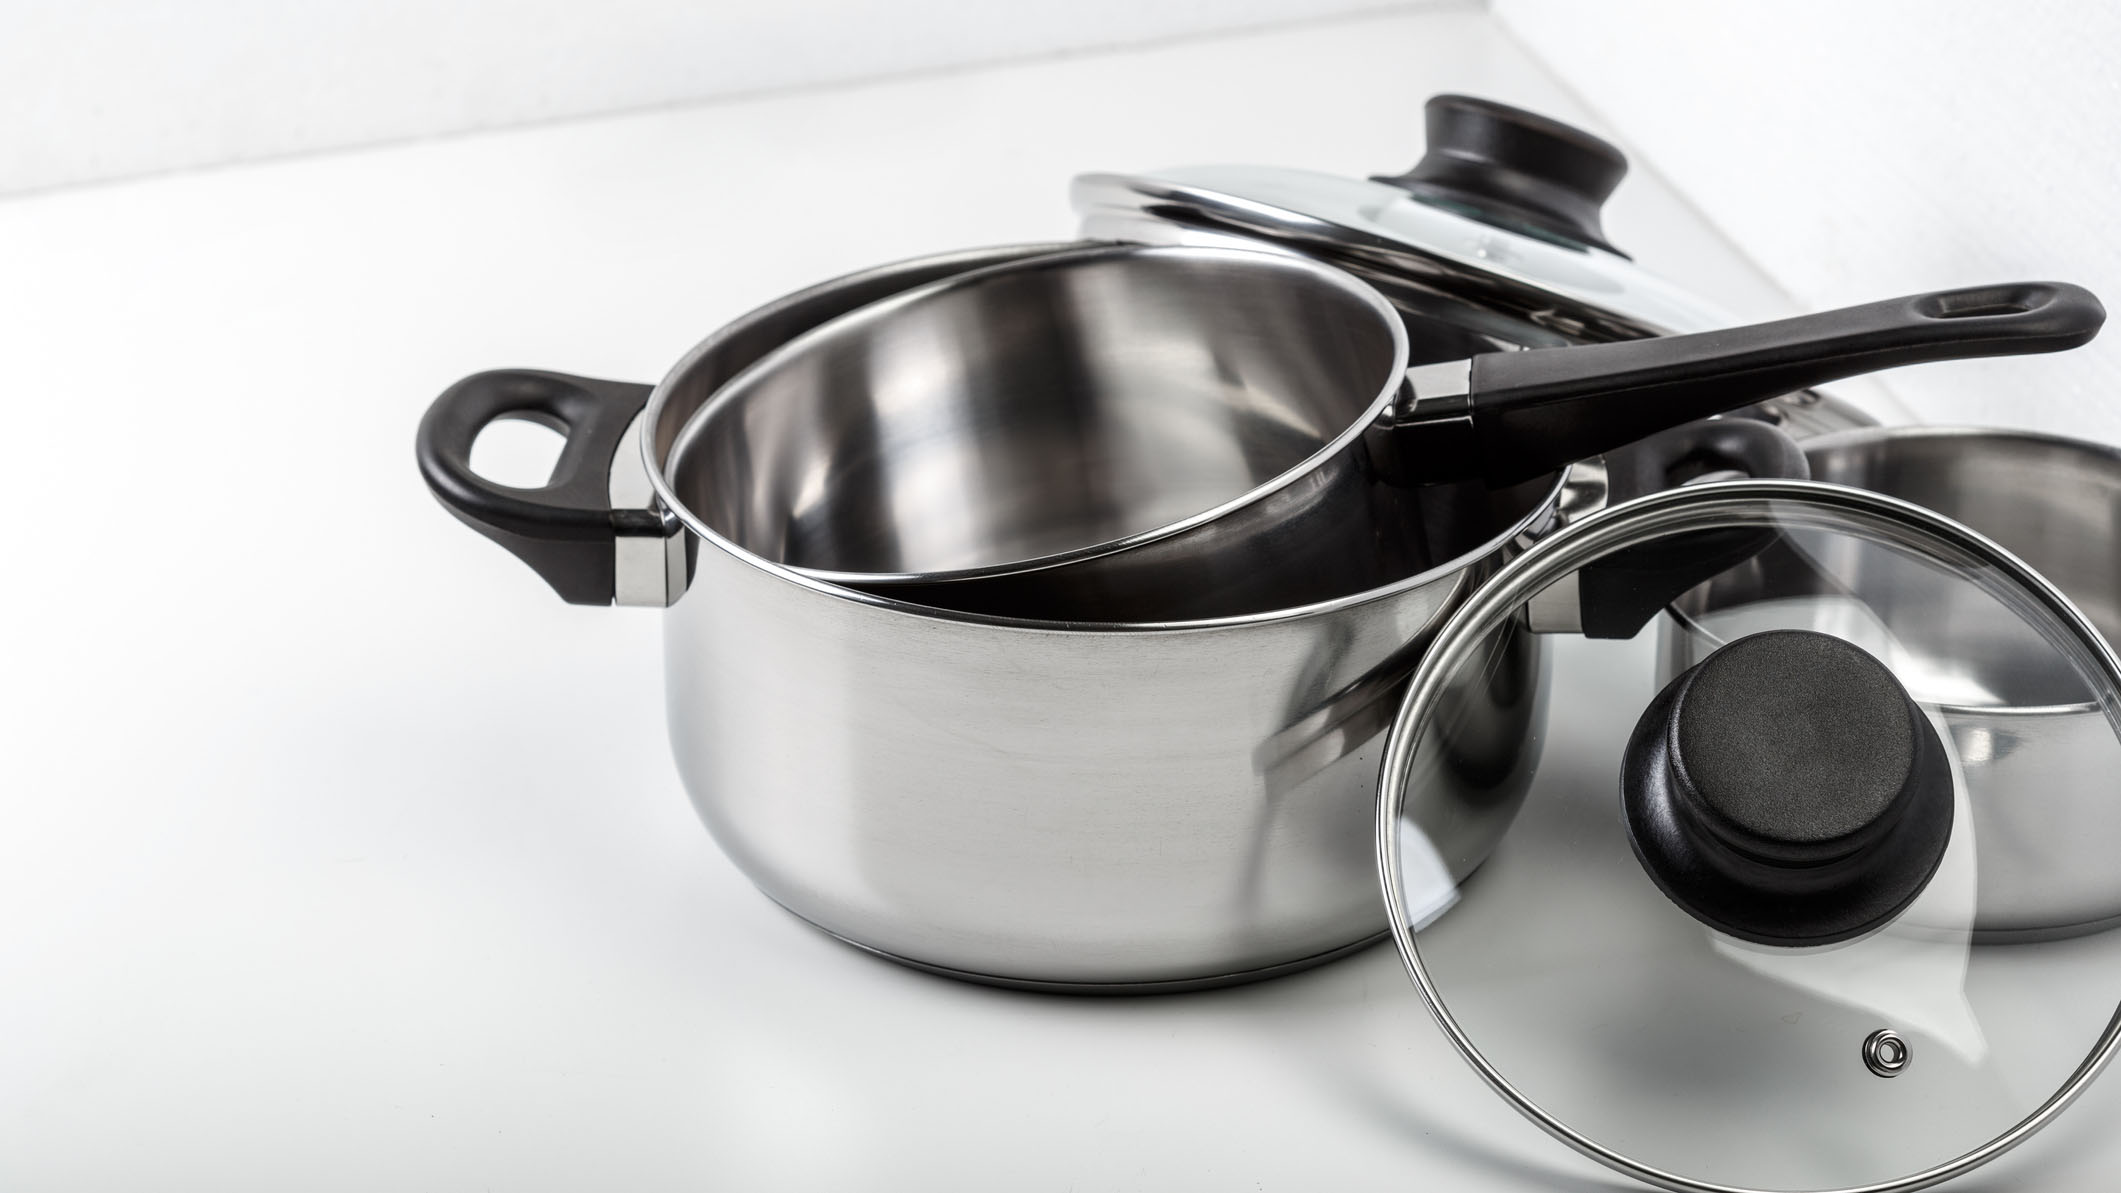 Pots and Pans Shopping - How to Find Best Pots and Pans